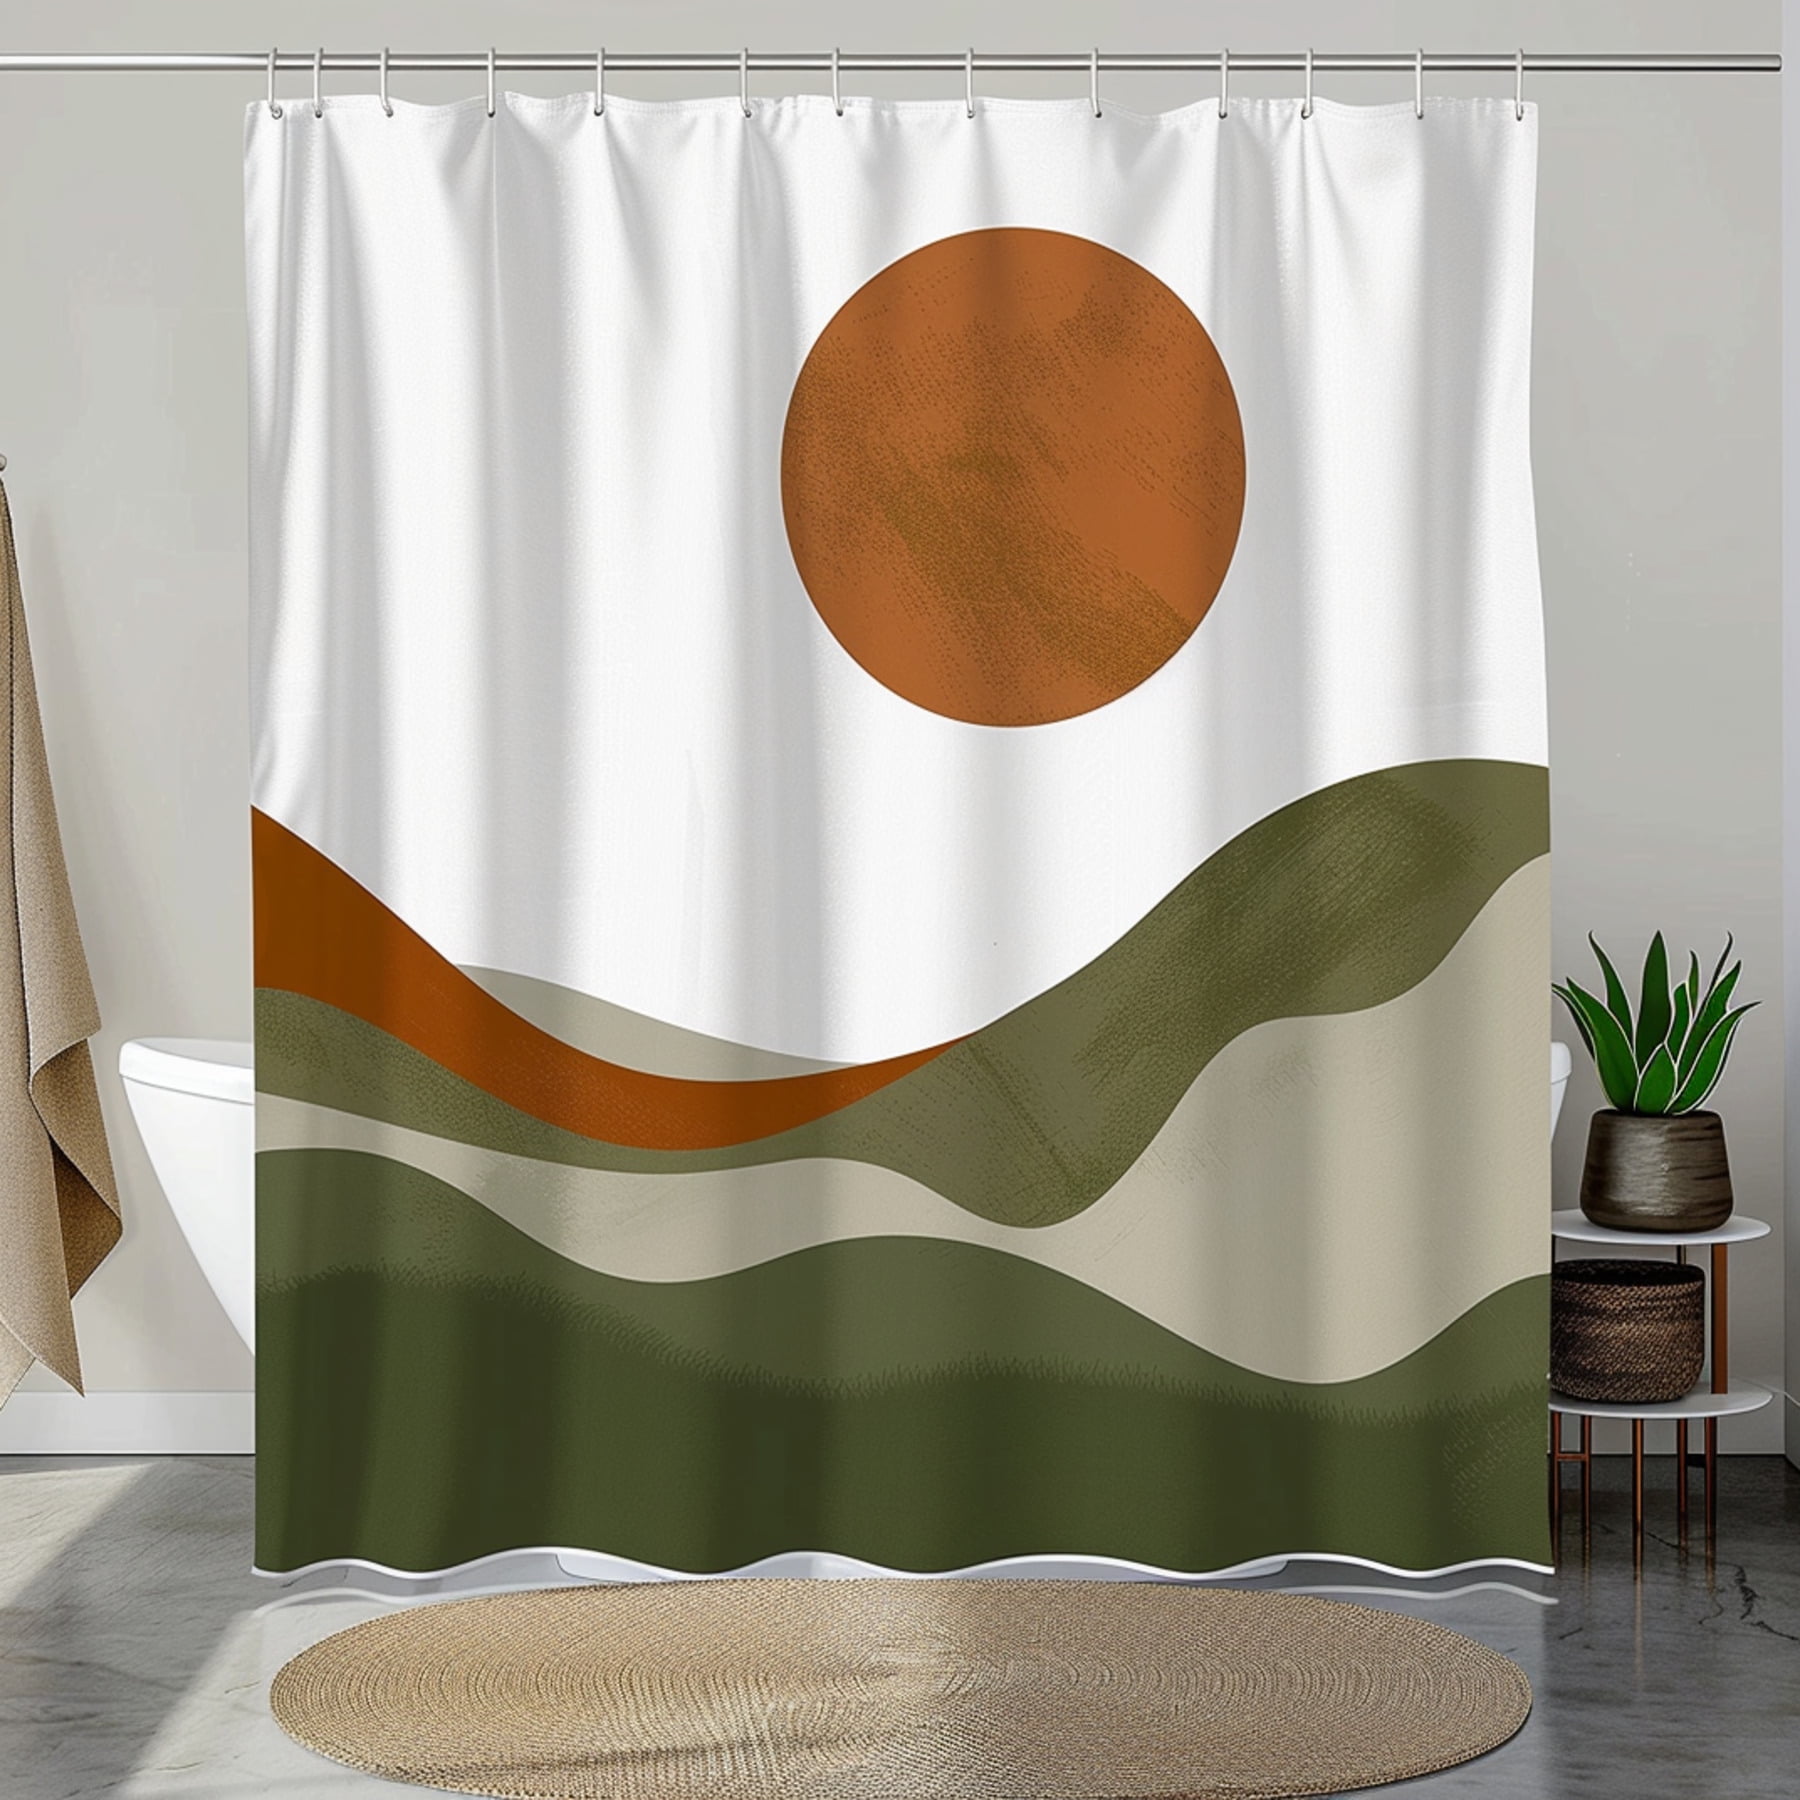 Modern minimalist style shower curtain with abstract landscape design ...